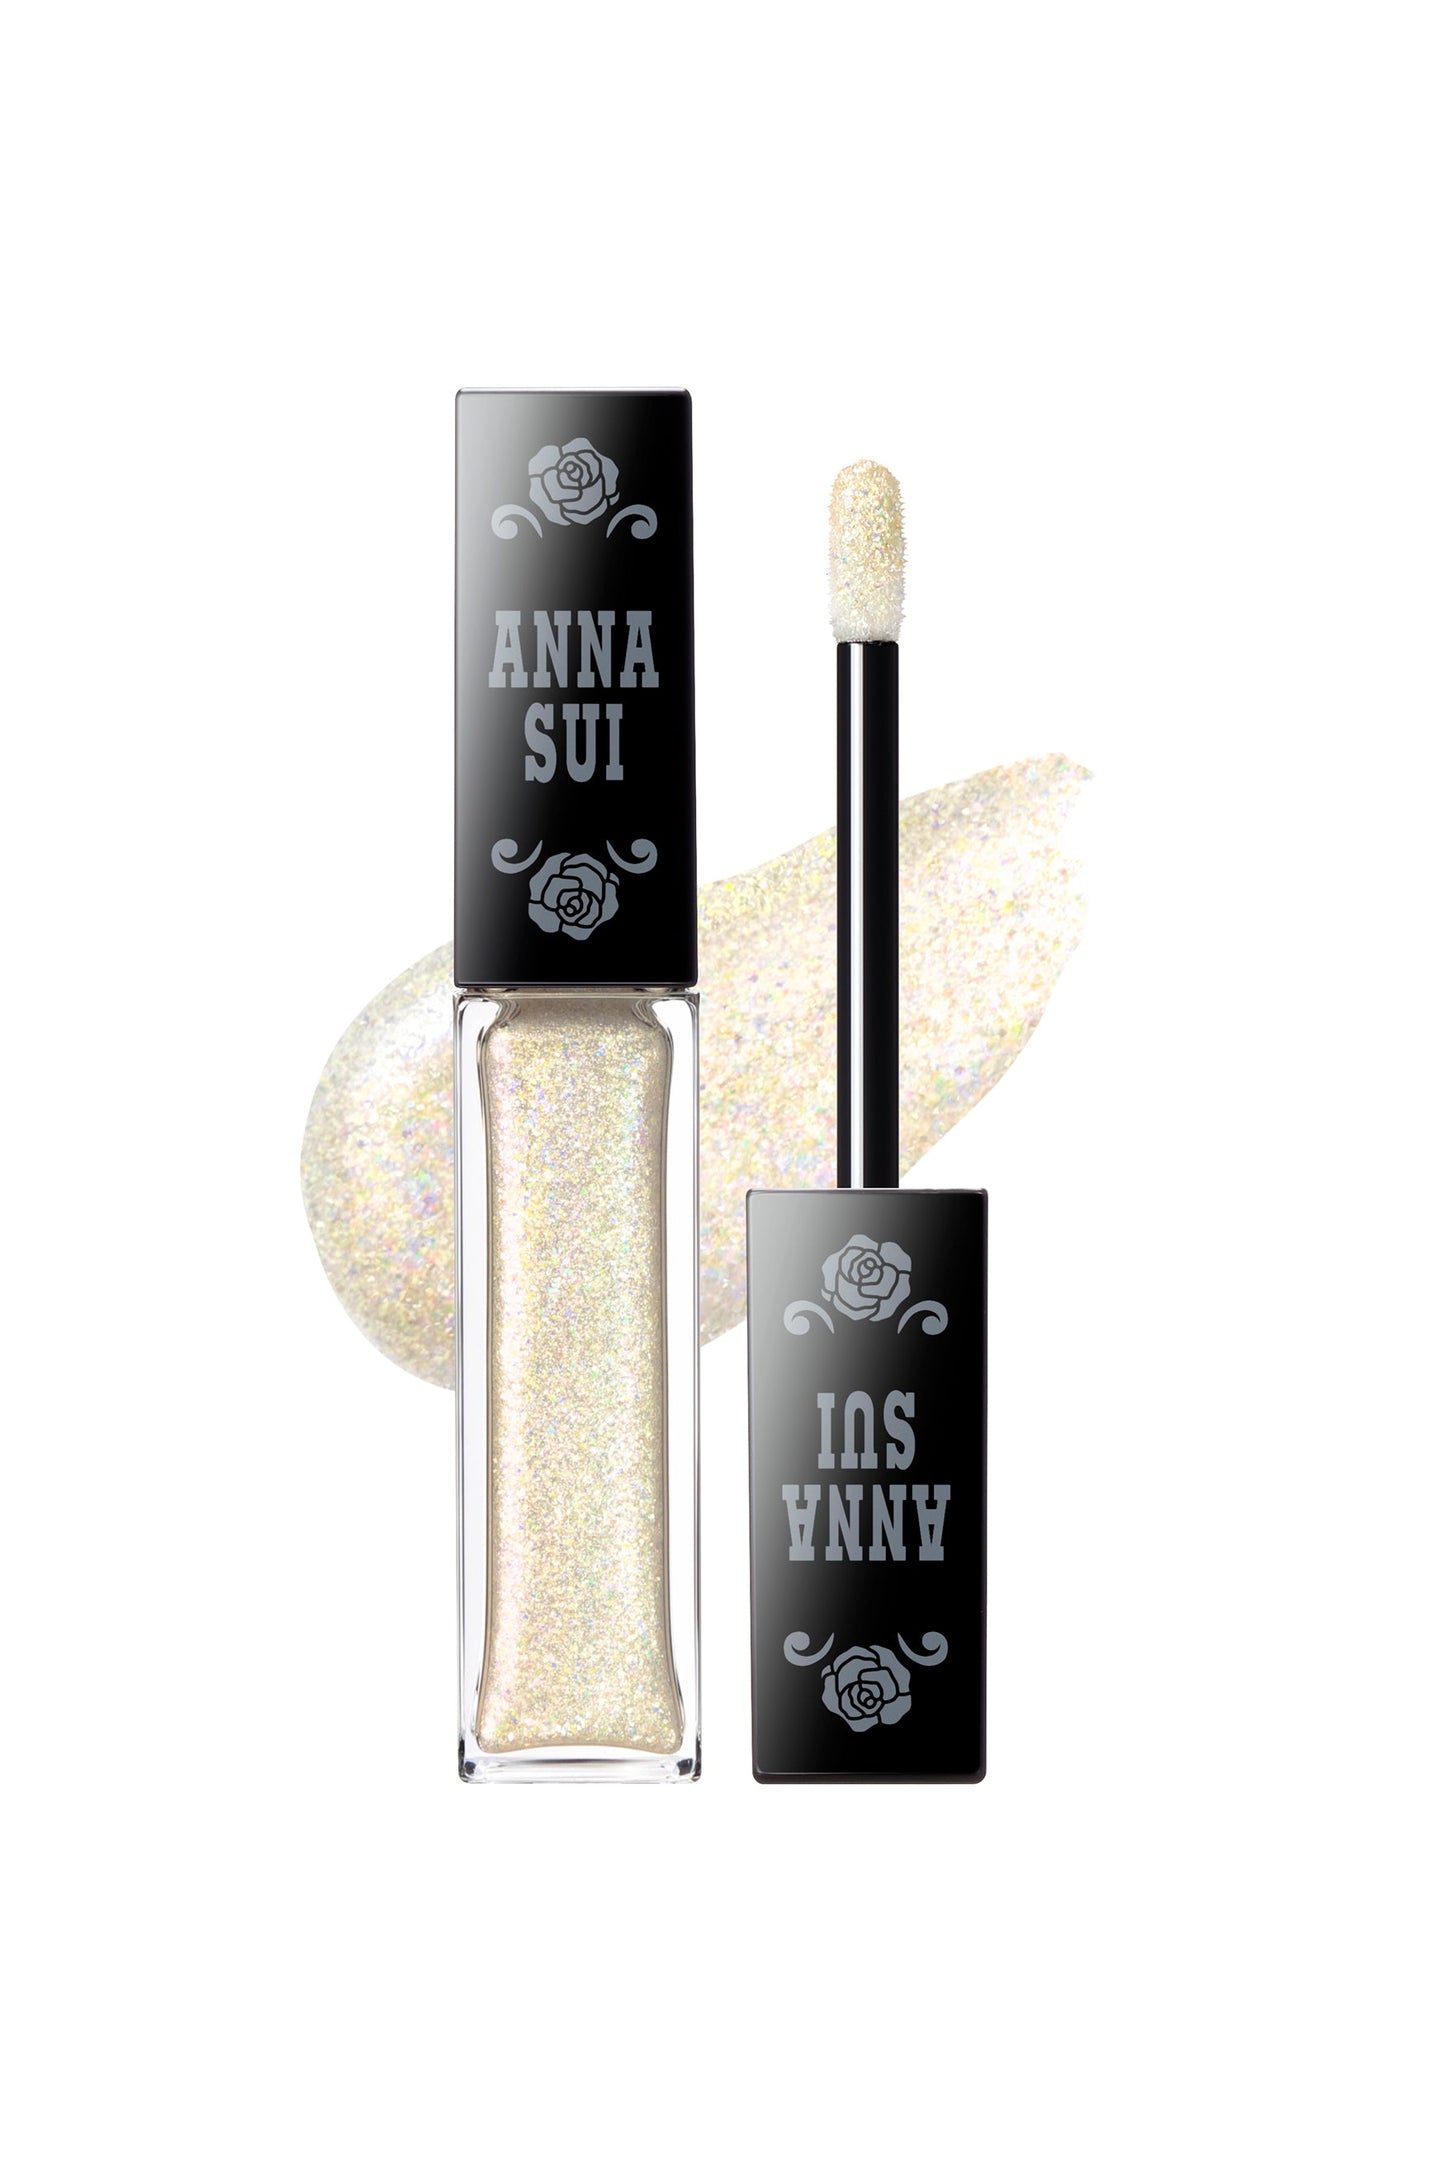 PEARLESCENT WHITE, transparent bottle & applicator with Anna Sui label on the black top.